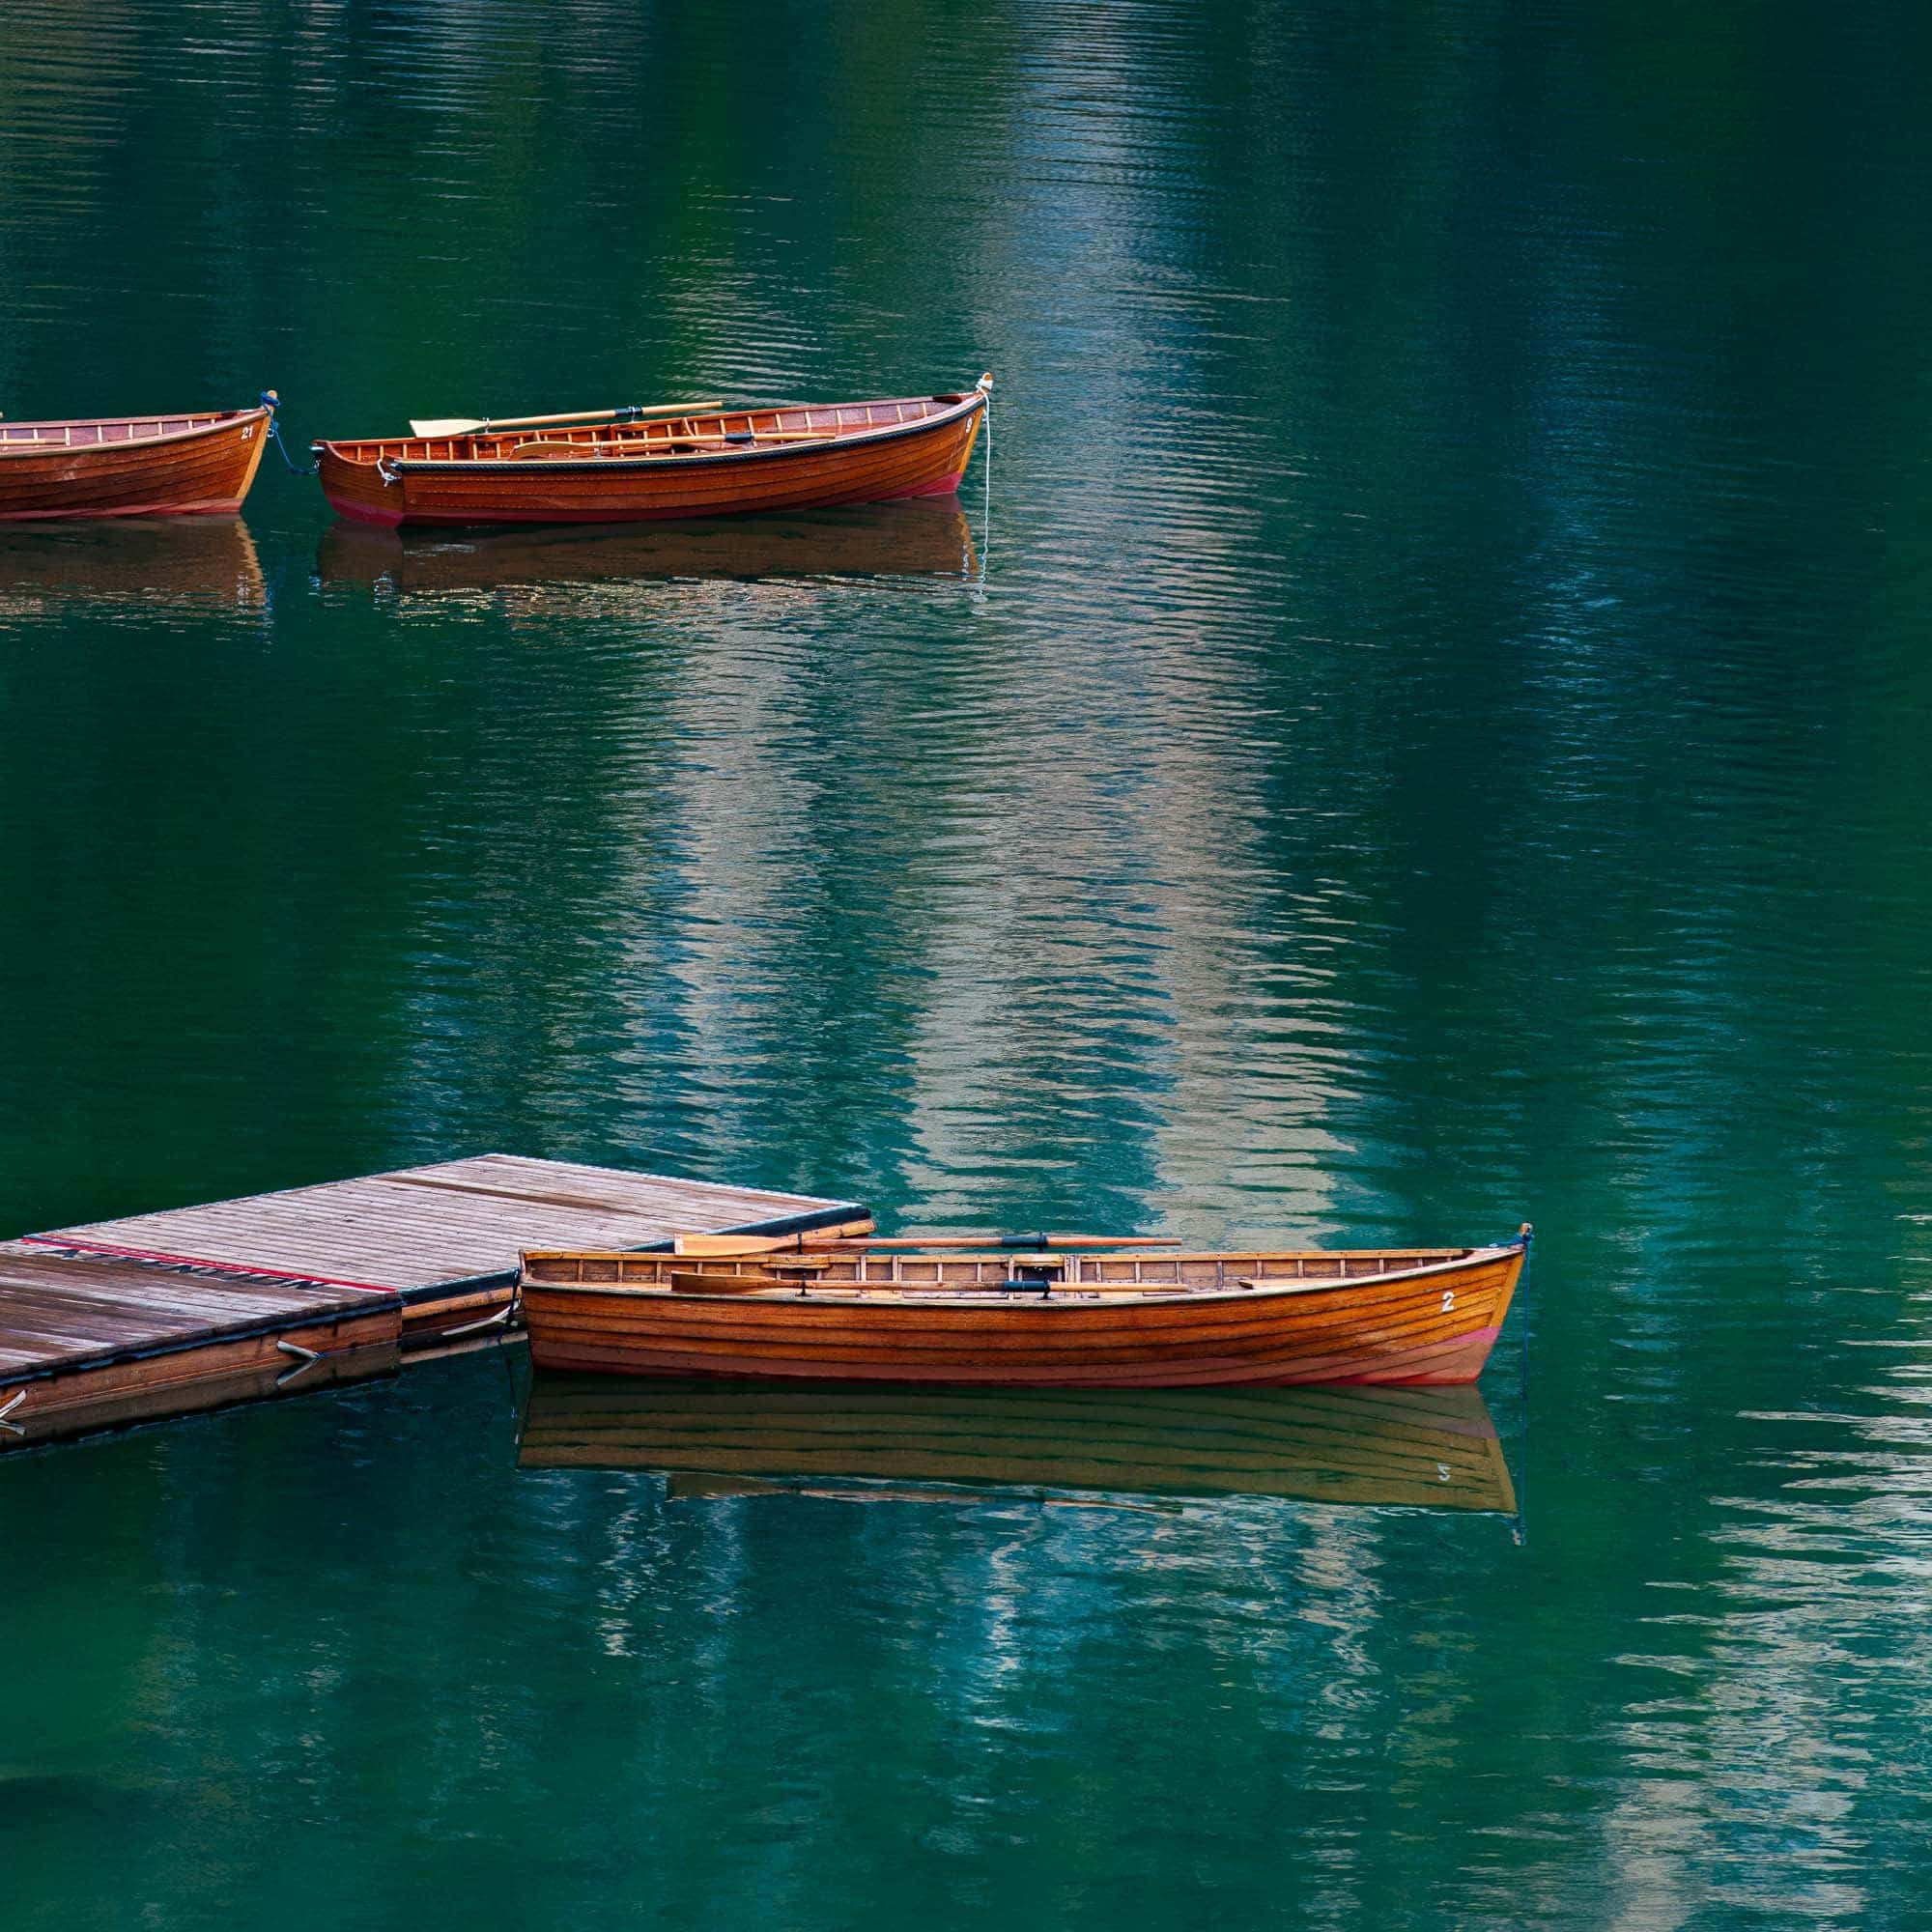 Three wooden boats floating gently on the crystal-clear waters of Lago di Braies in the Dolomites, Italy.